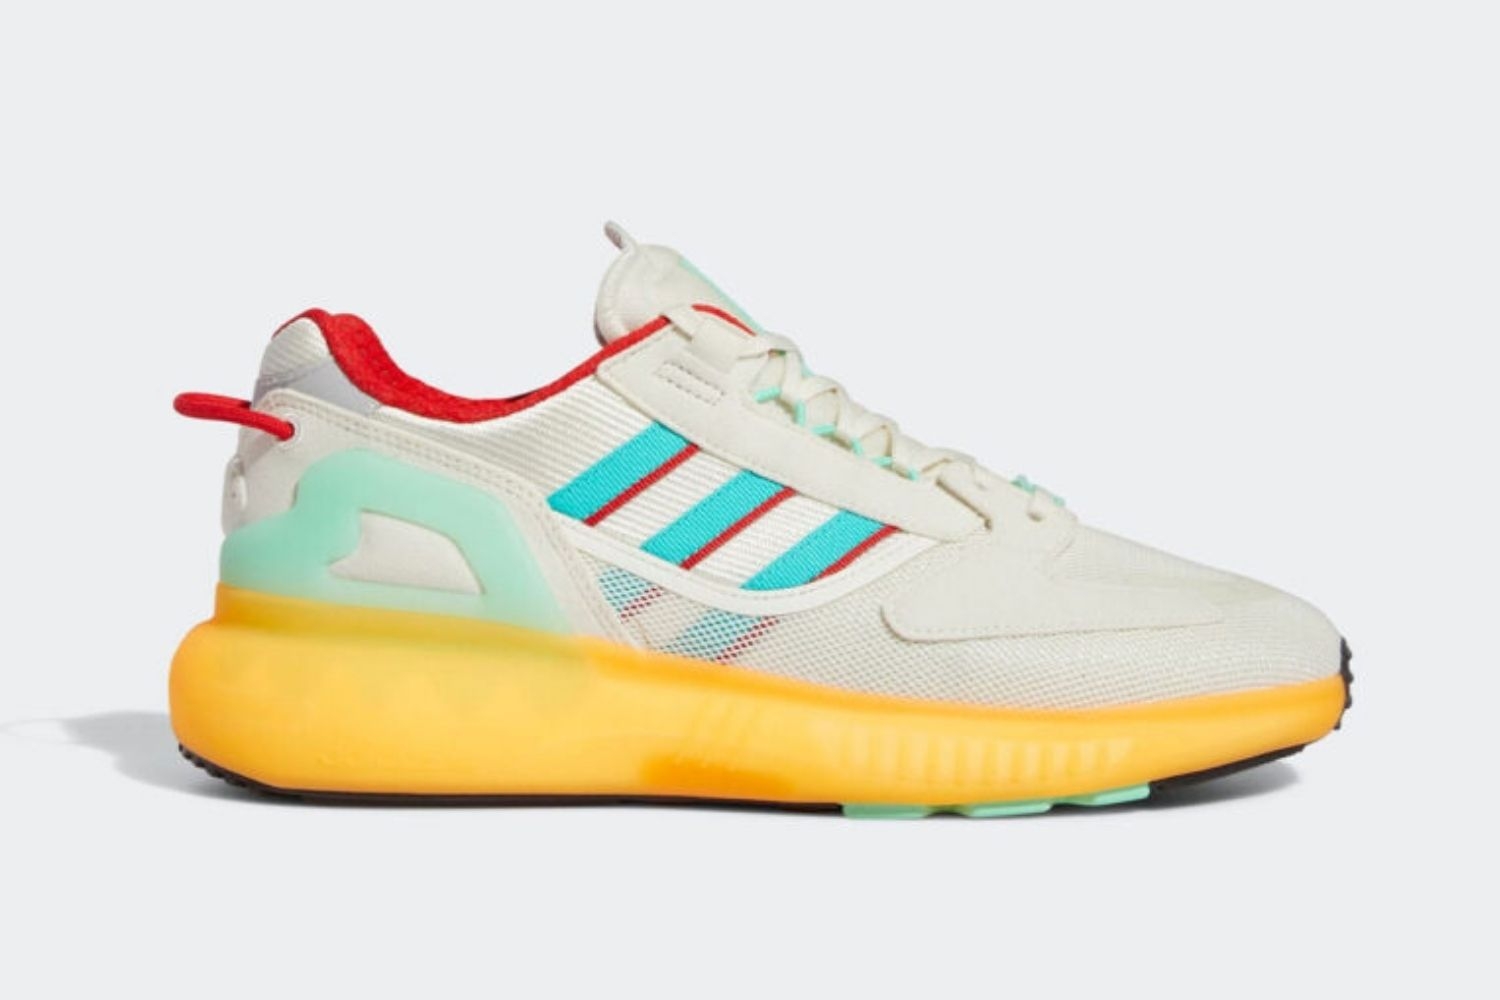 The adidas ZX 5K BOOST is inspired by the OG ZX 6000